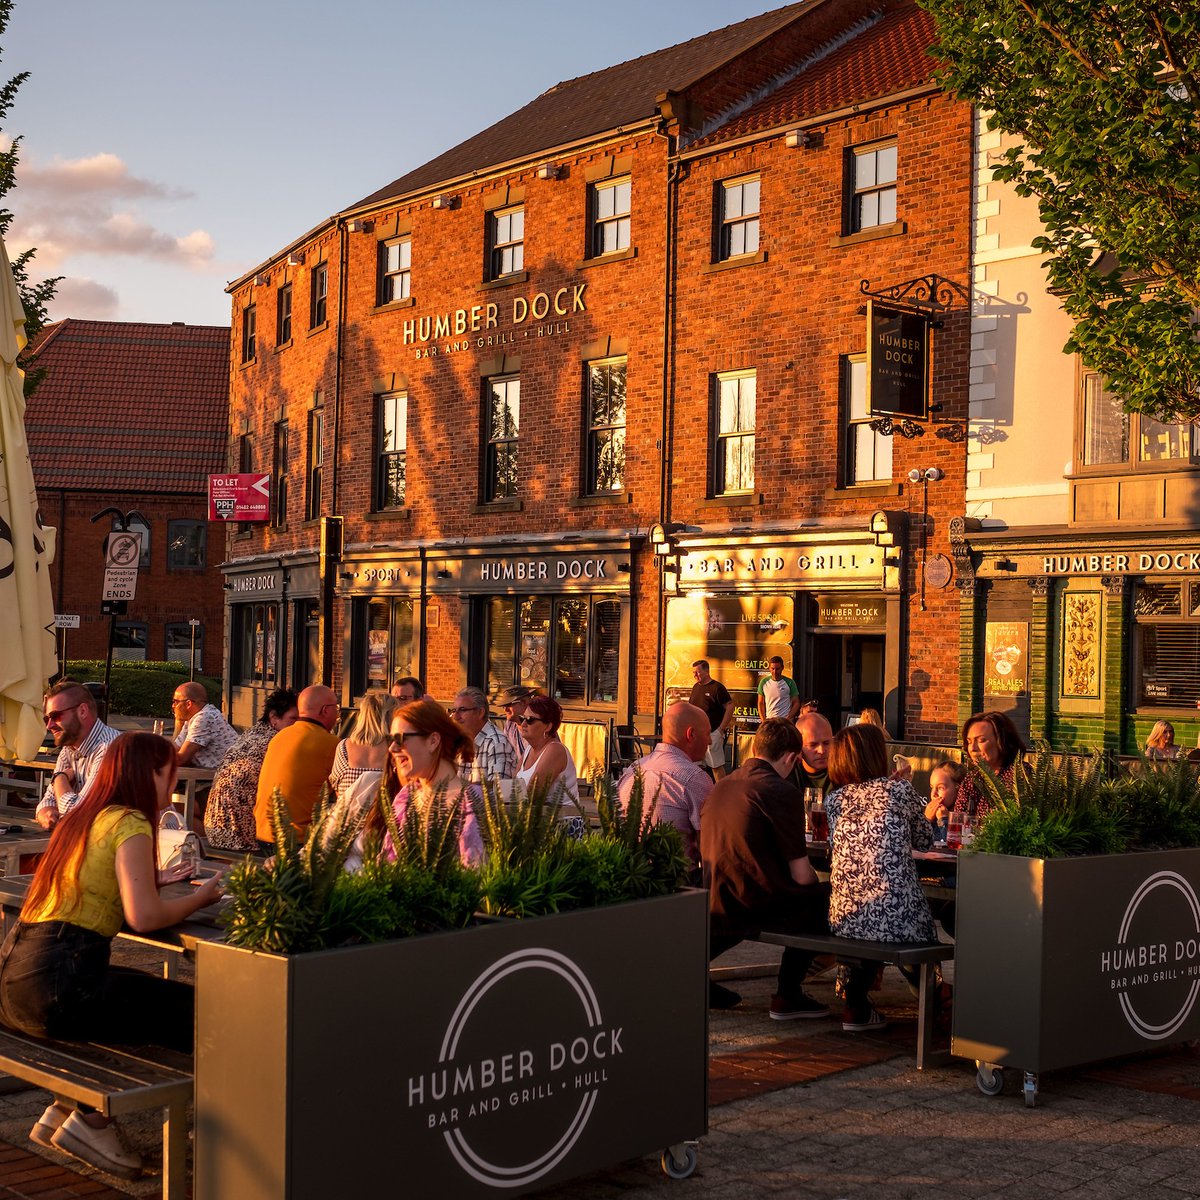 It might not feel like it today but warmer days will be here in a flash. Filled with gigs, festivals and drinks on the marina ⛵ ☀️ Get ahead of the crowds and book your hotel rooms now so can party well into the night 🎉 🛏️ 👉 loom.ly/oxkDZRE #MustBeHull